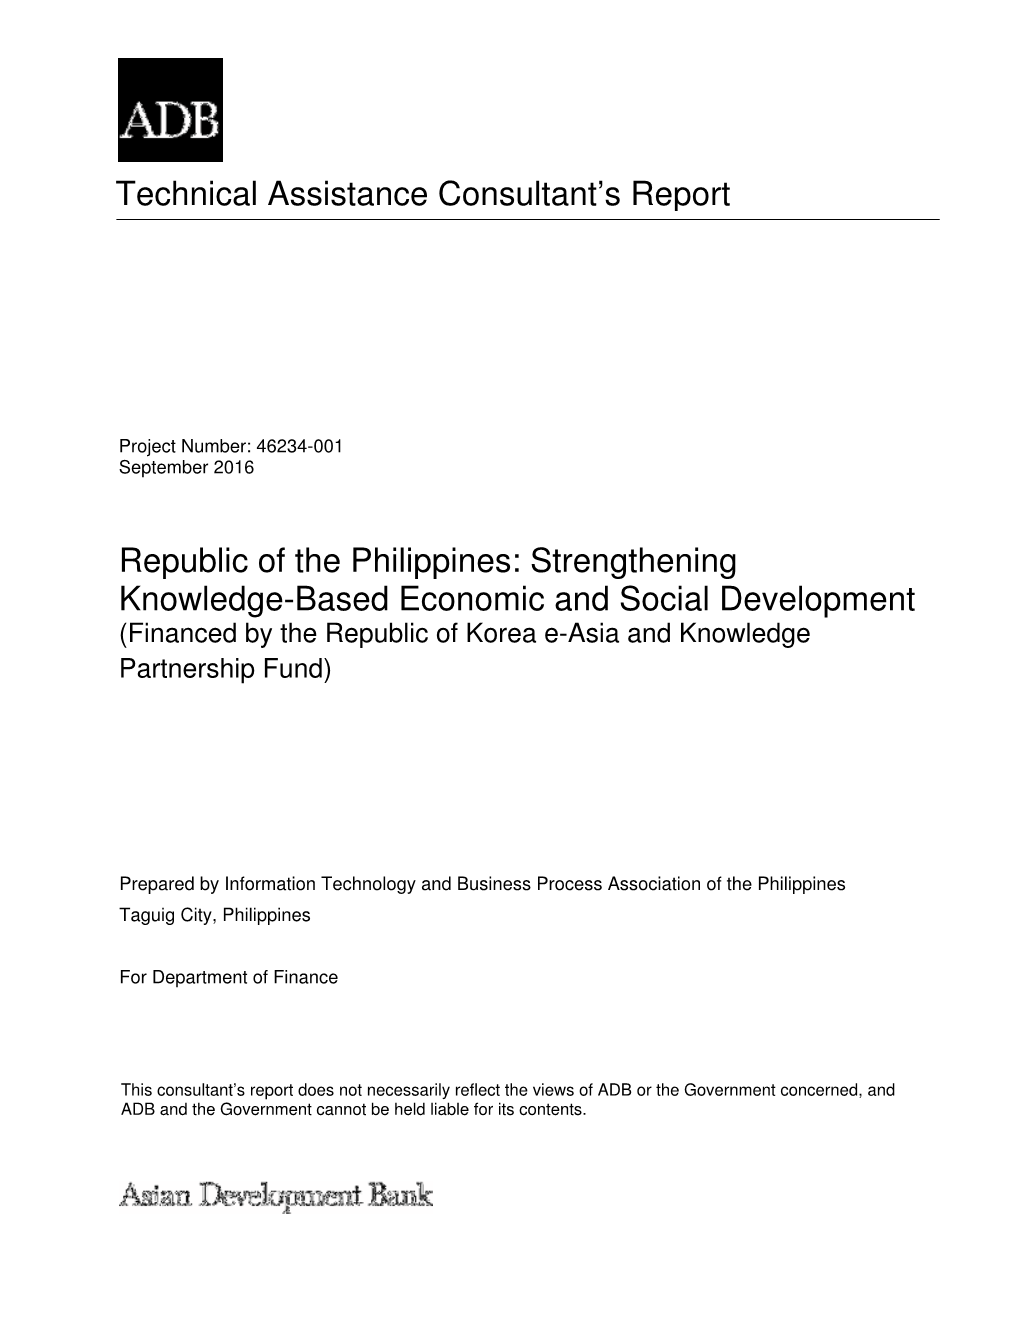 Republic of the Philippines: Strengthening Knowledge-Based Economic and Social Development (Financed by the Republic of Korea E-Asia and Knowledge Partnership Fund)